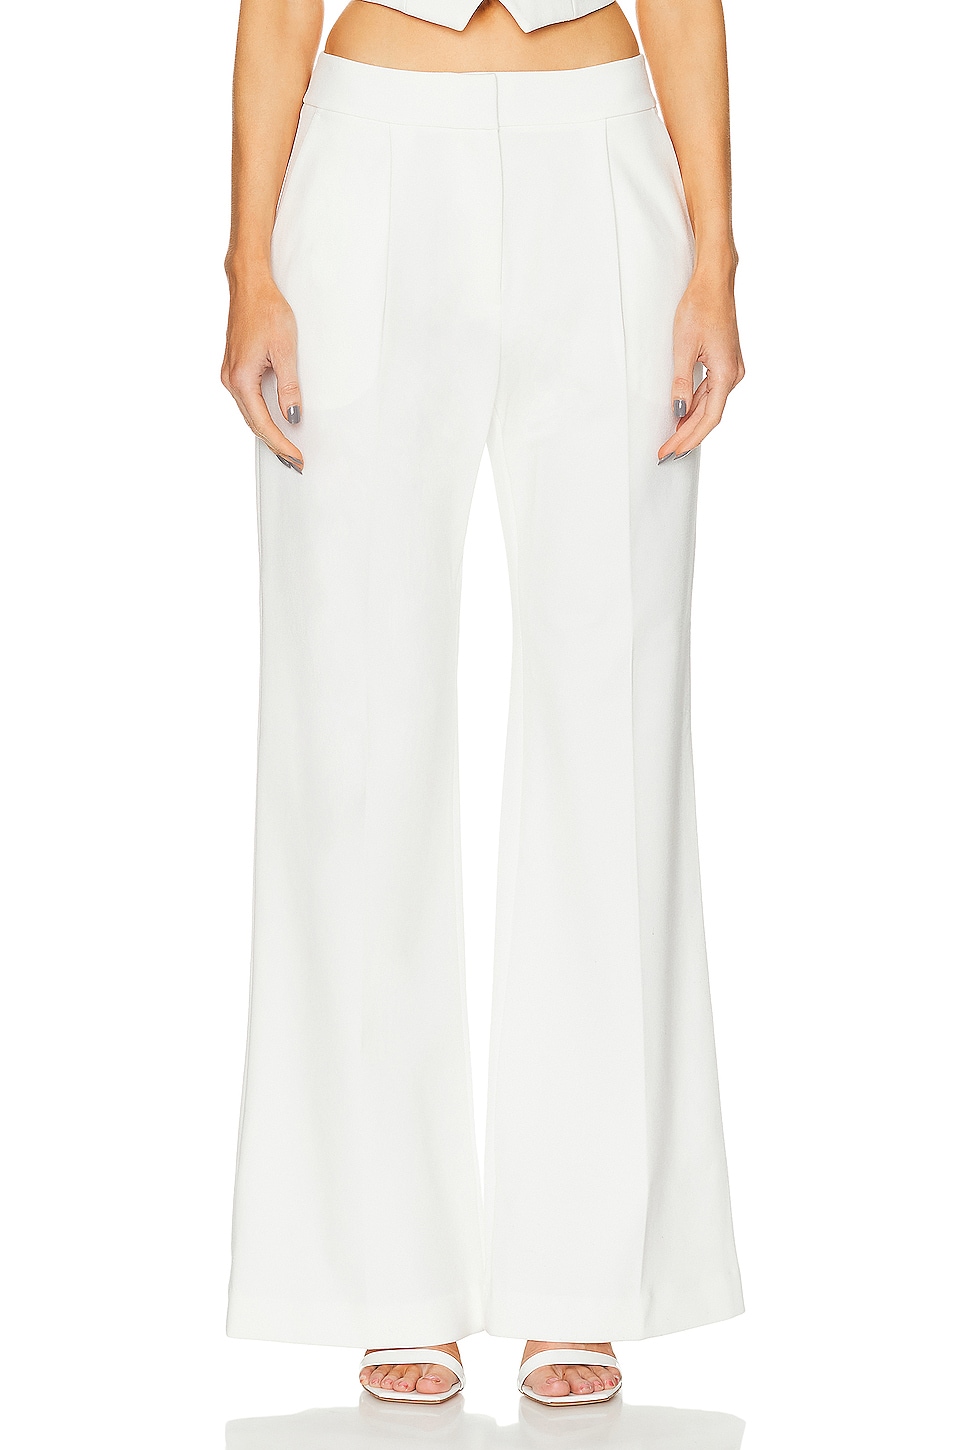 Pin Tuck Palazzo Pant in White